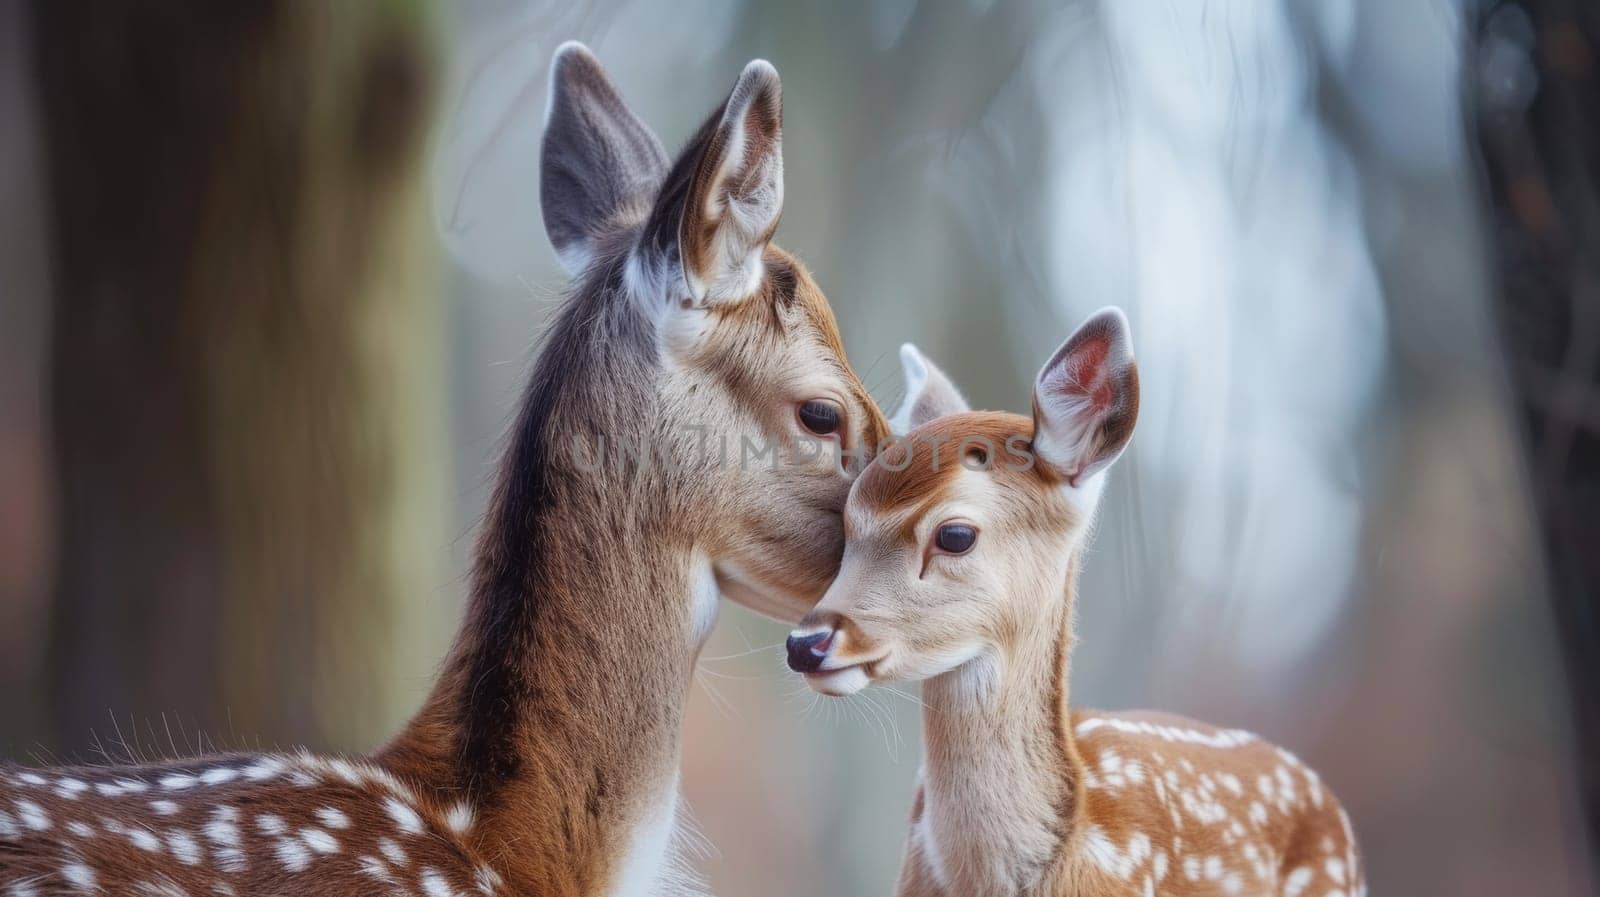 A small deer is nuzzling the head of a larger one